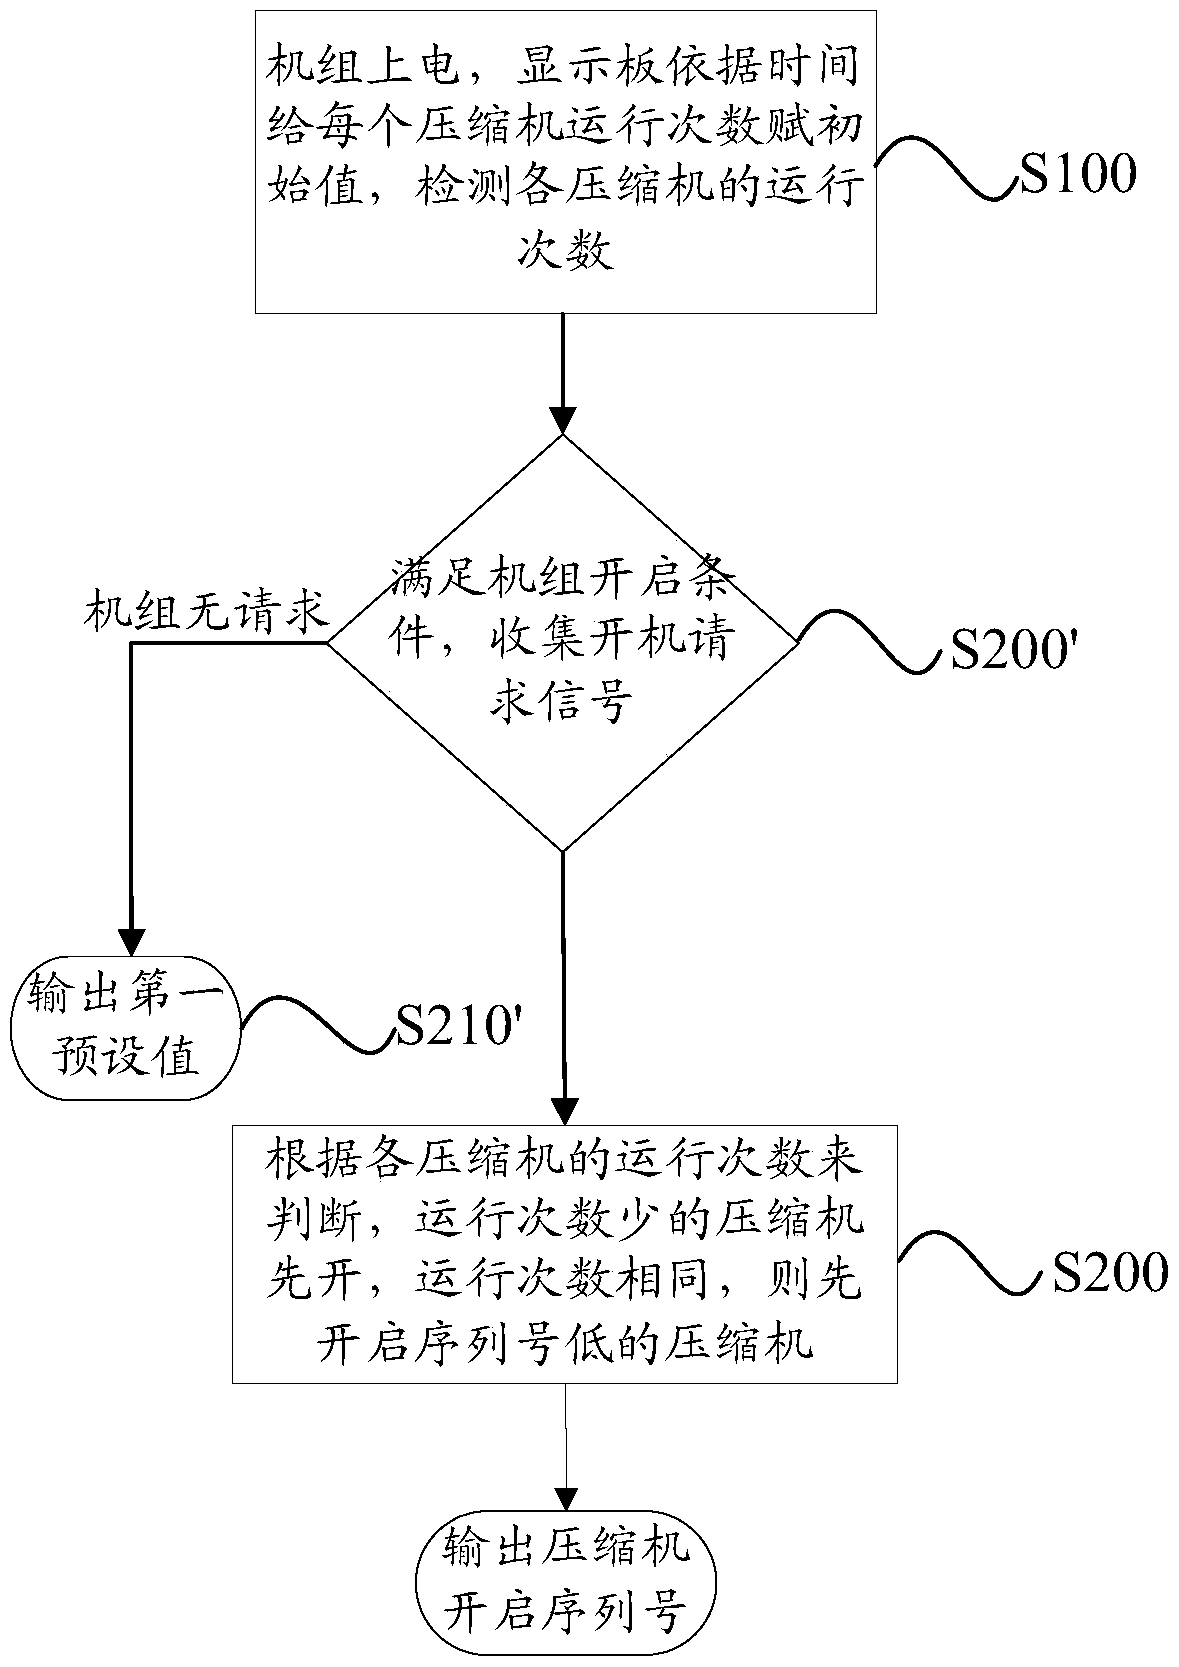 Compressor operation scheduling method, system and air conditioning unit